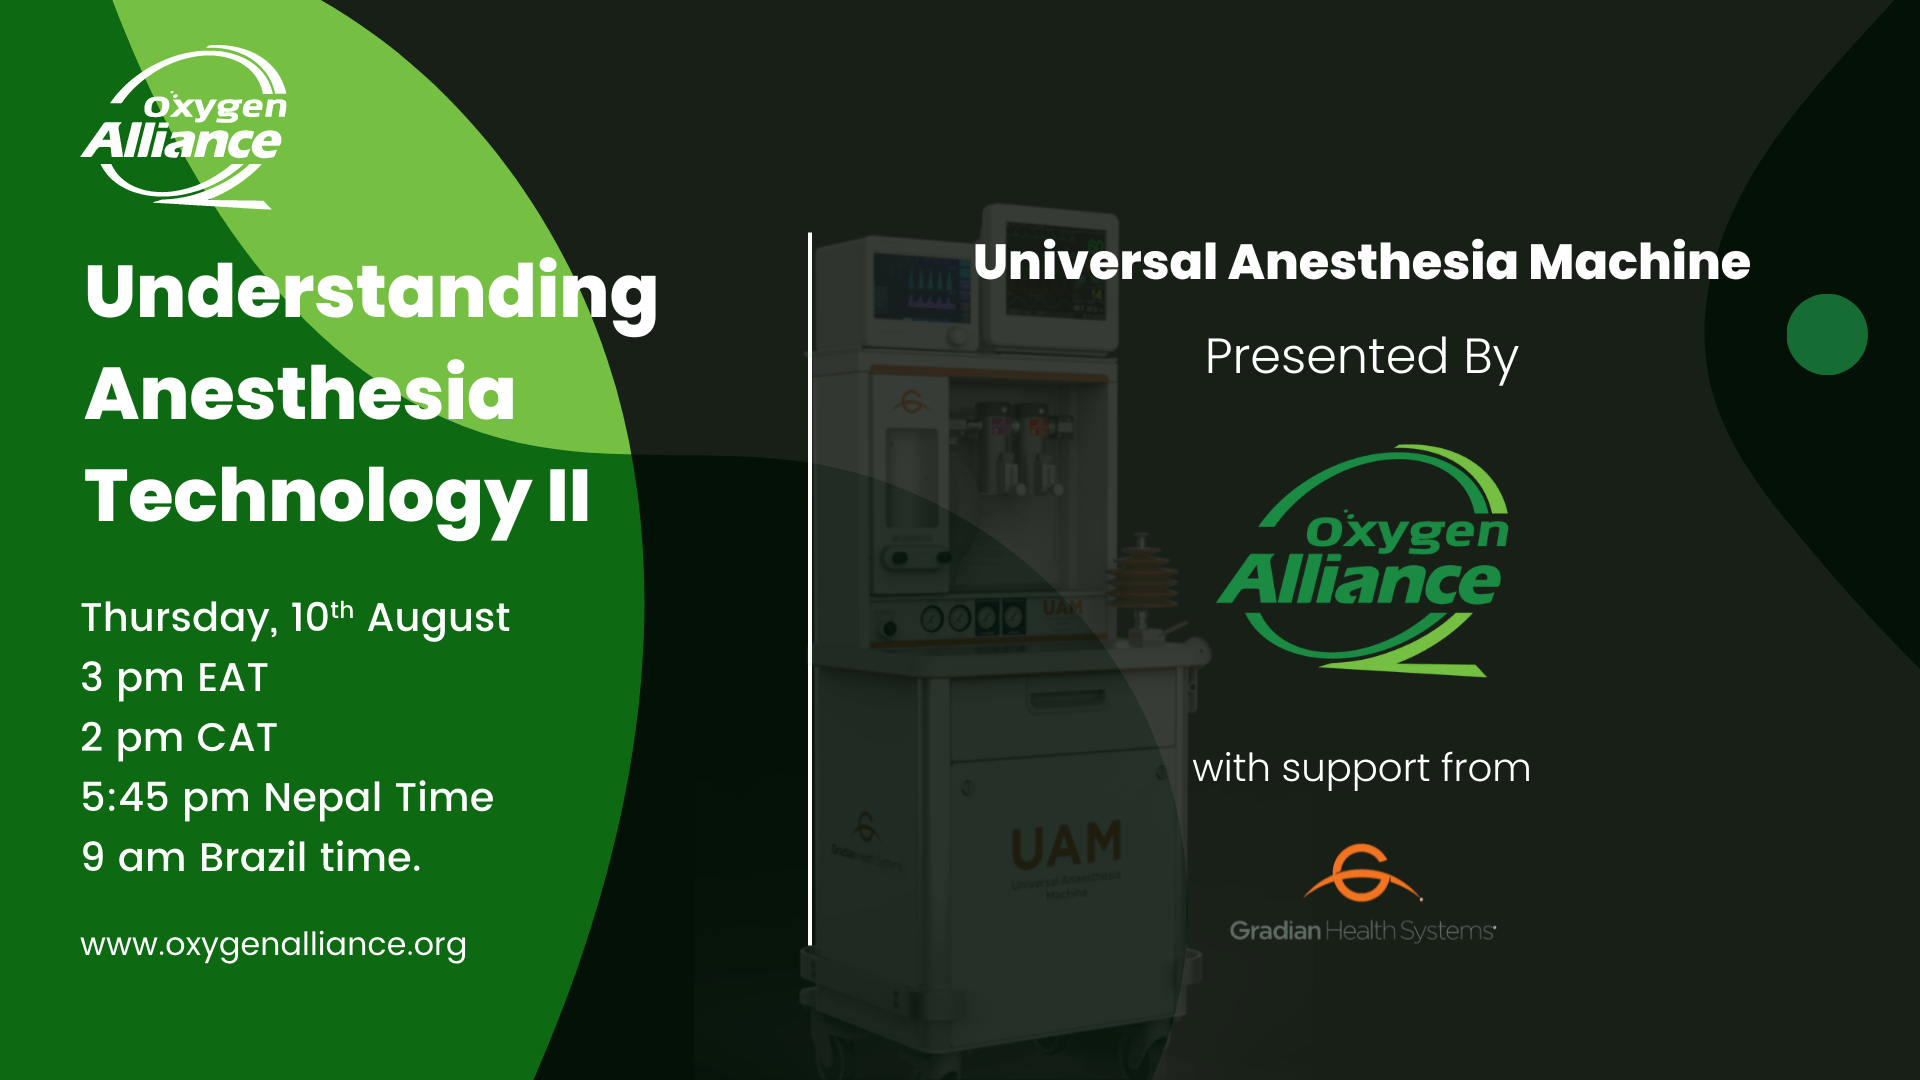 Understanding Anesthesia Technology: Exploring the Universal Anesthesia Machine 1 Oxygen Alliance